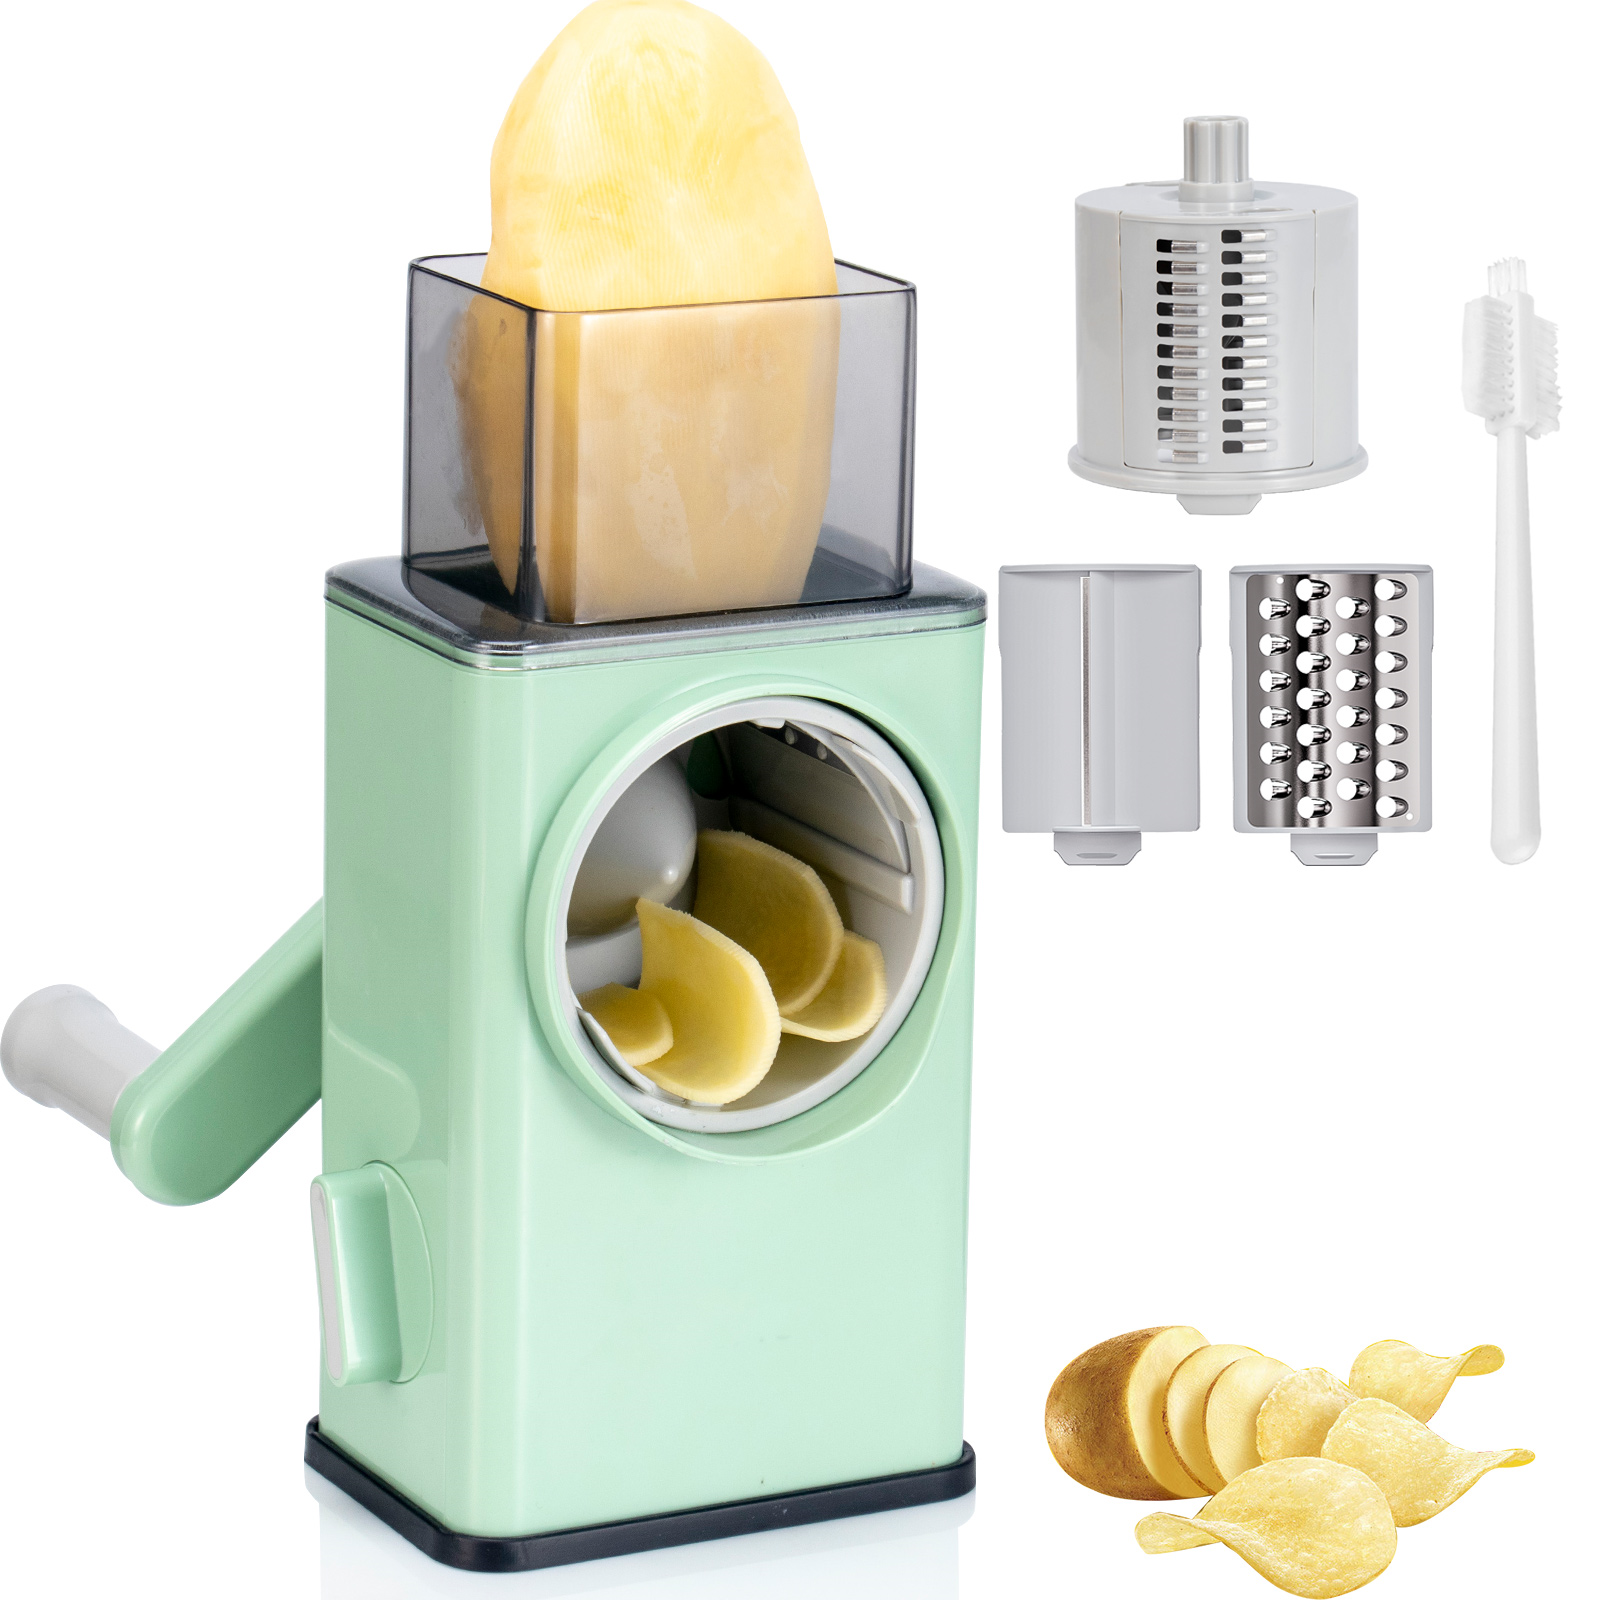 A Home 5 In 1 Rotary Cheese Grater With Handle [5 Interchangeable